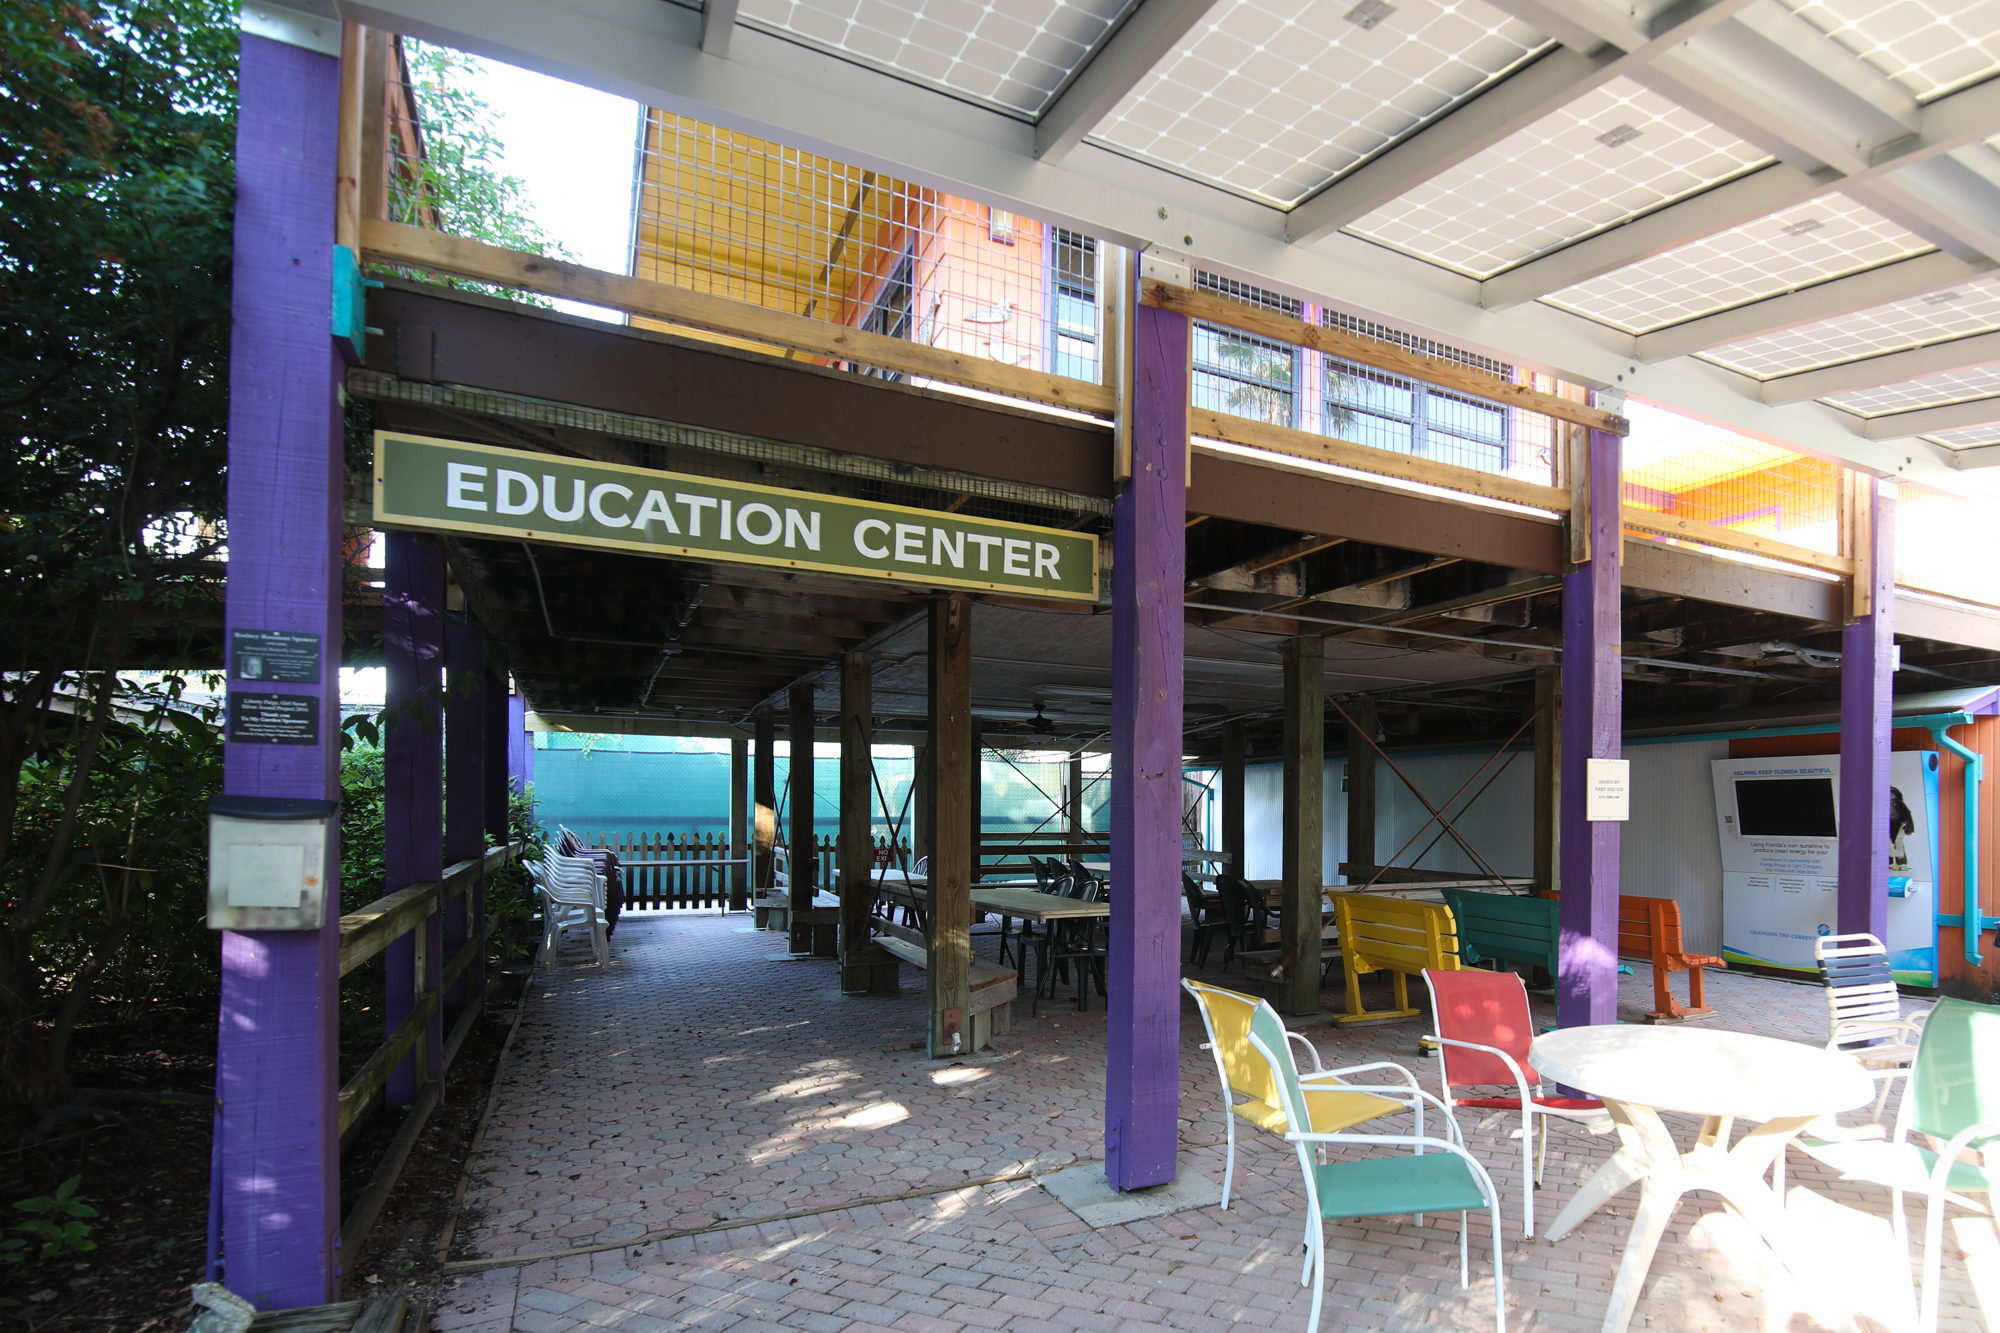 Today's education center. Photo courtesy of Save Our Seabirds.